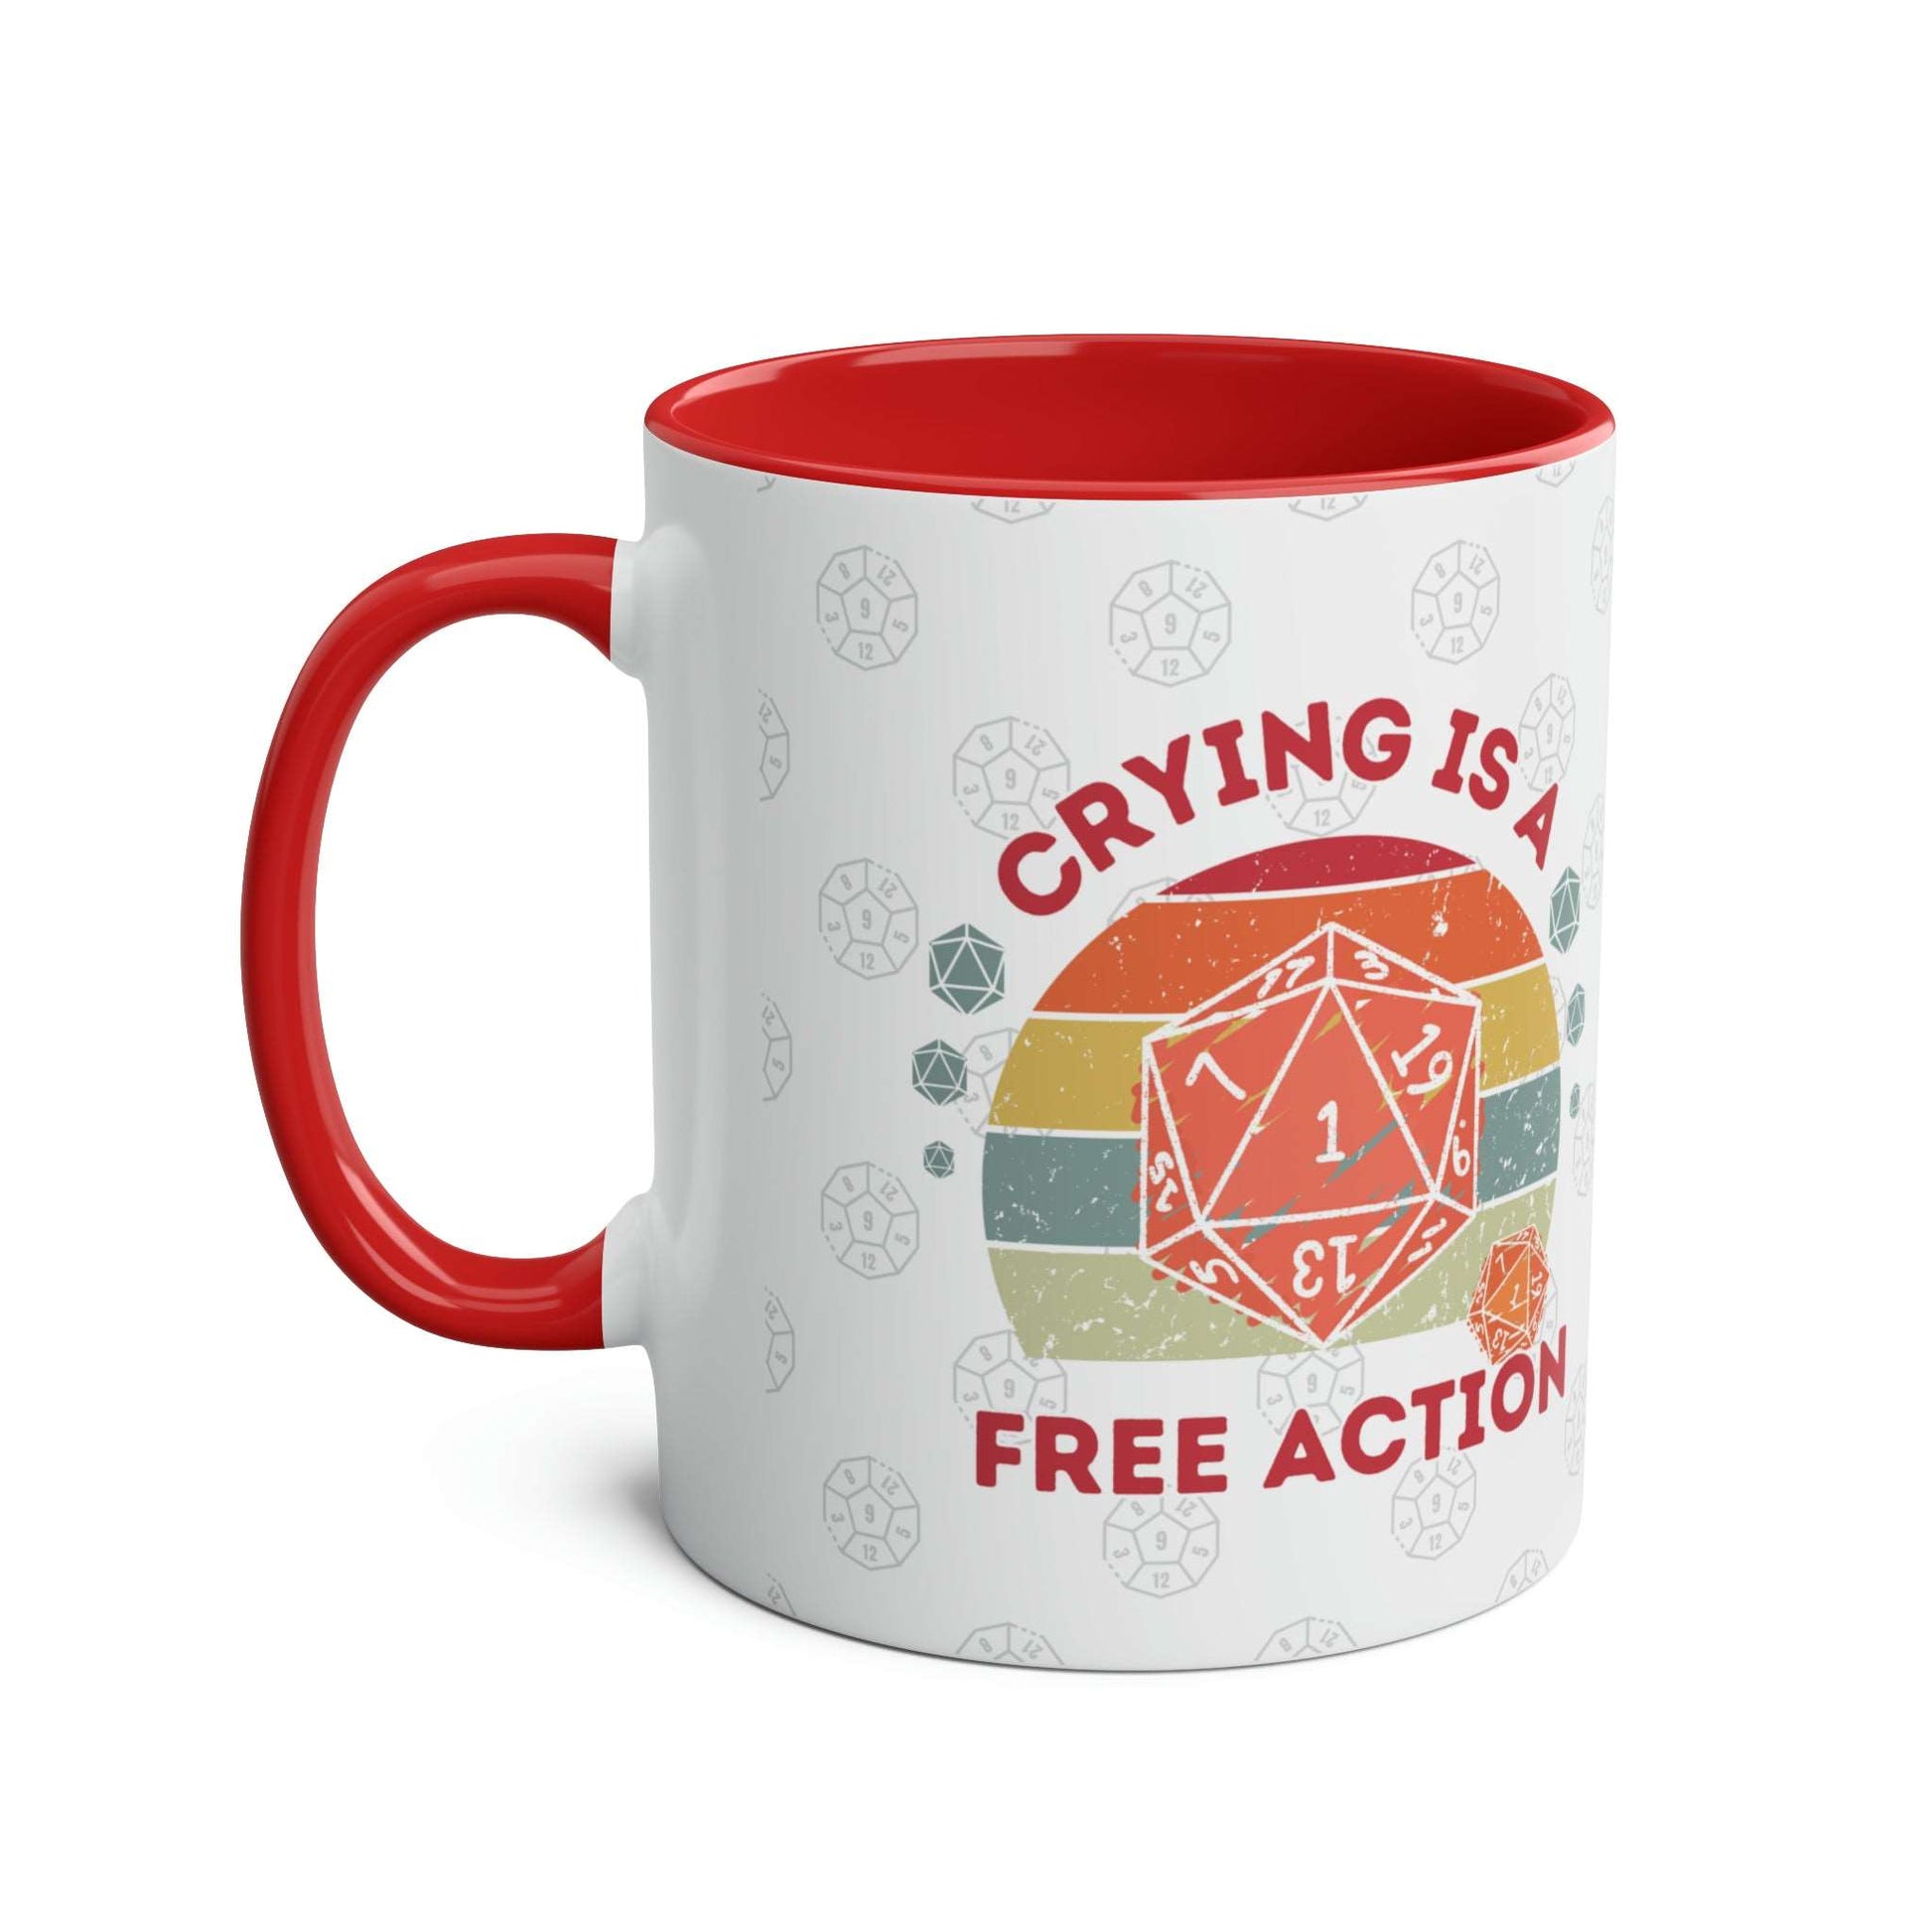 Dnd Mug Crying is a Free Action Coffee Cup, Great Gift for DM or Dungeons, Dragons Players with Nat1 D20 Retro Design